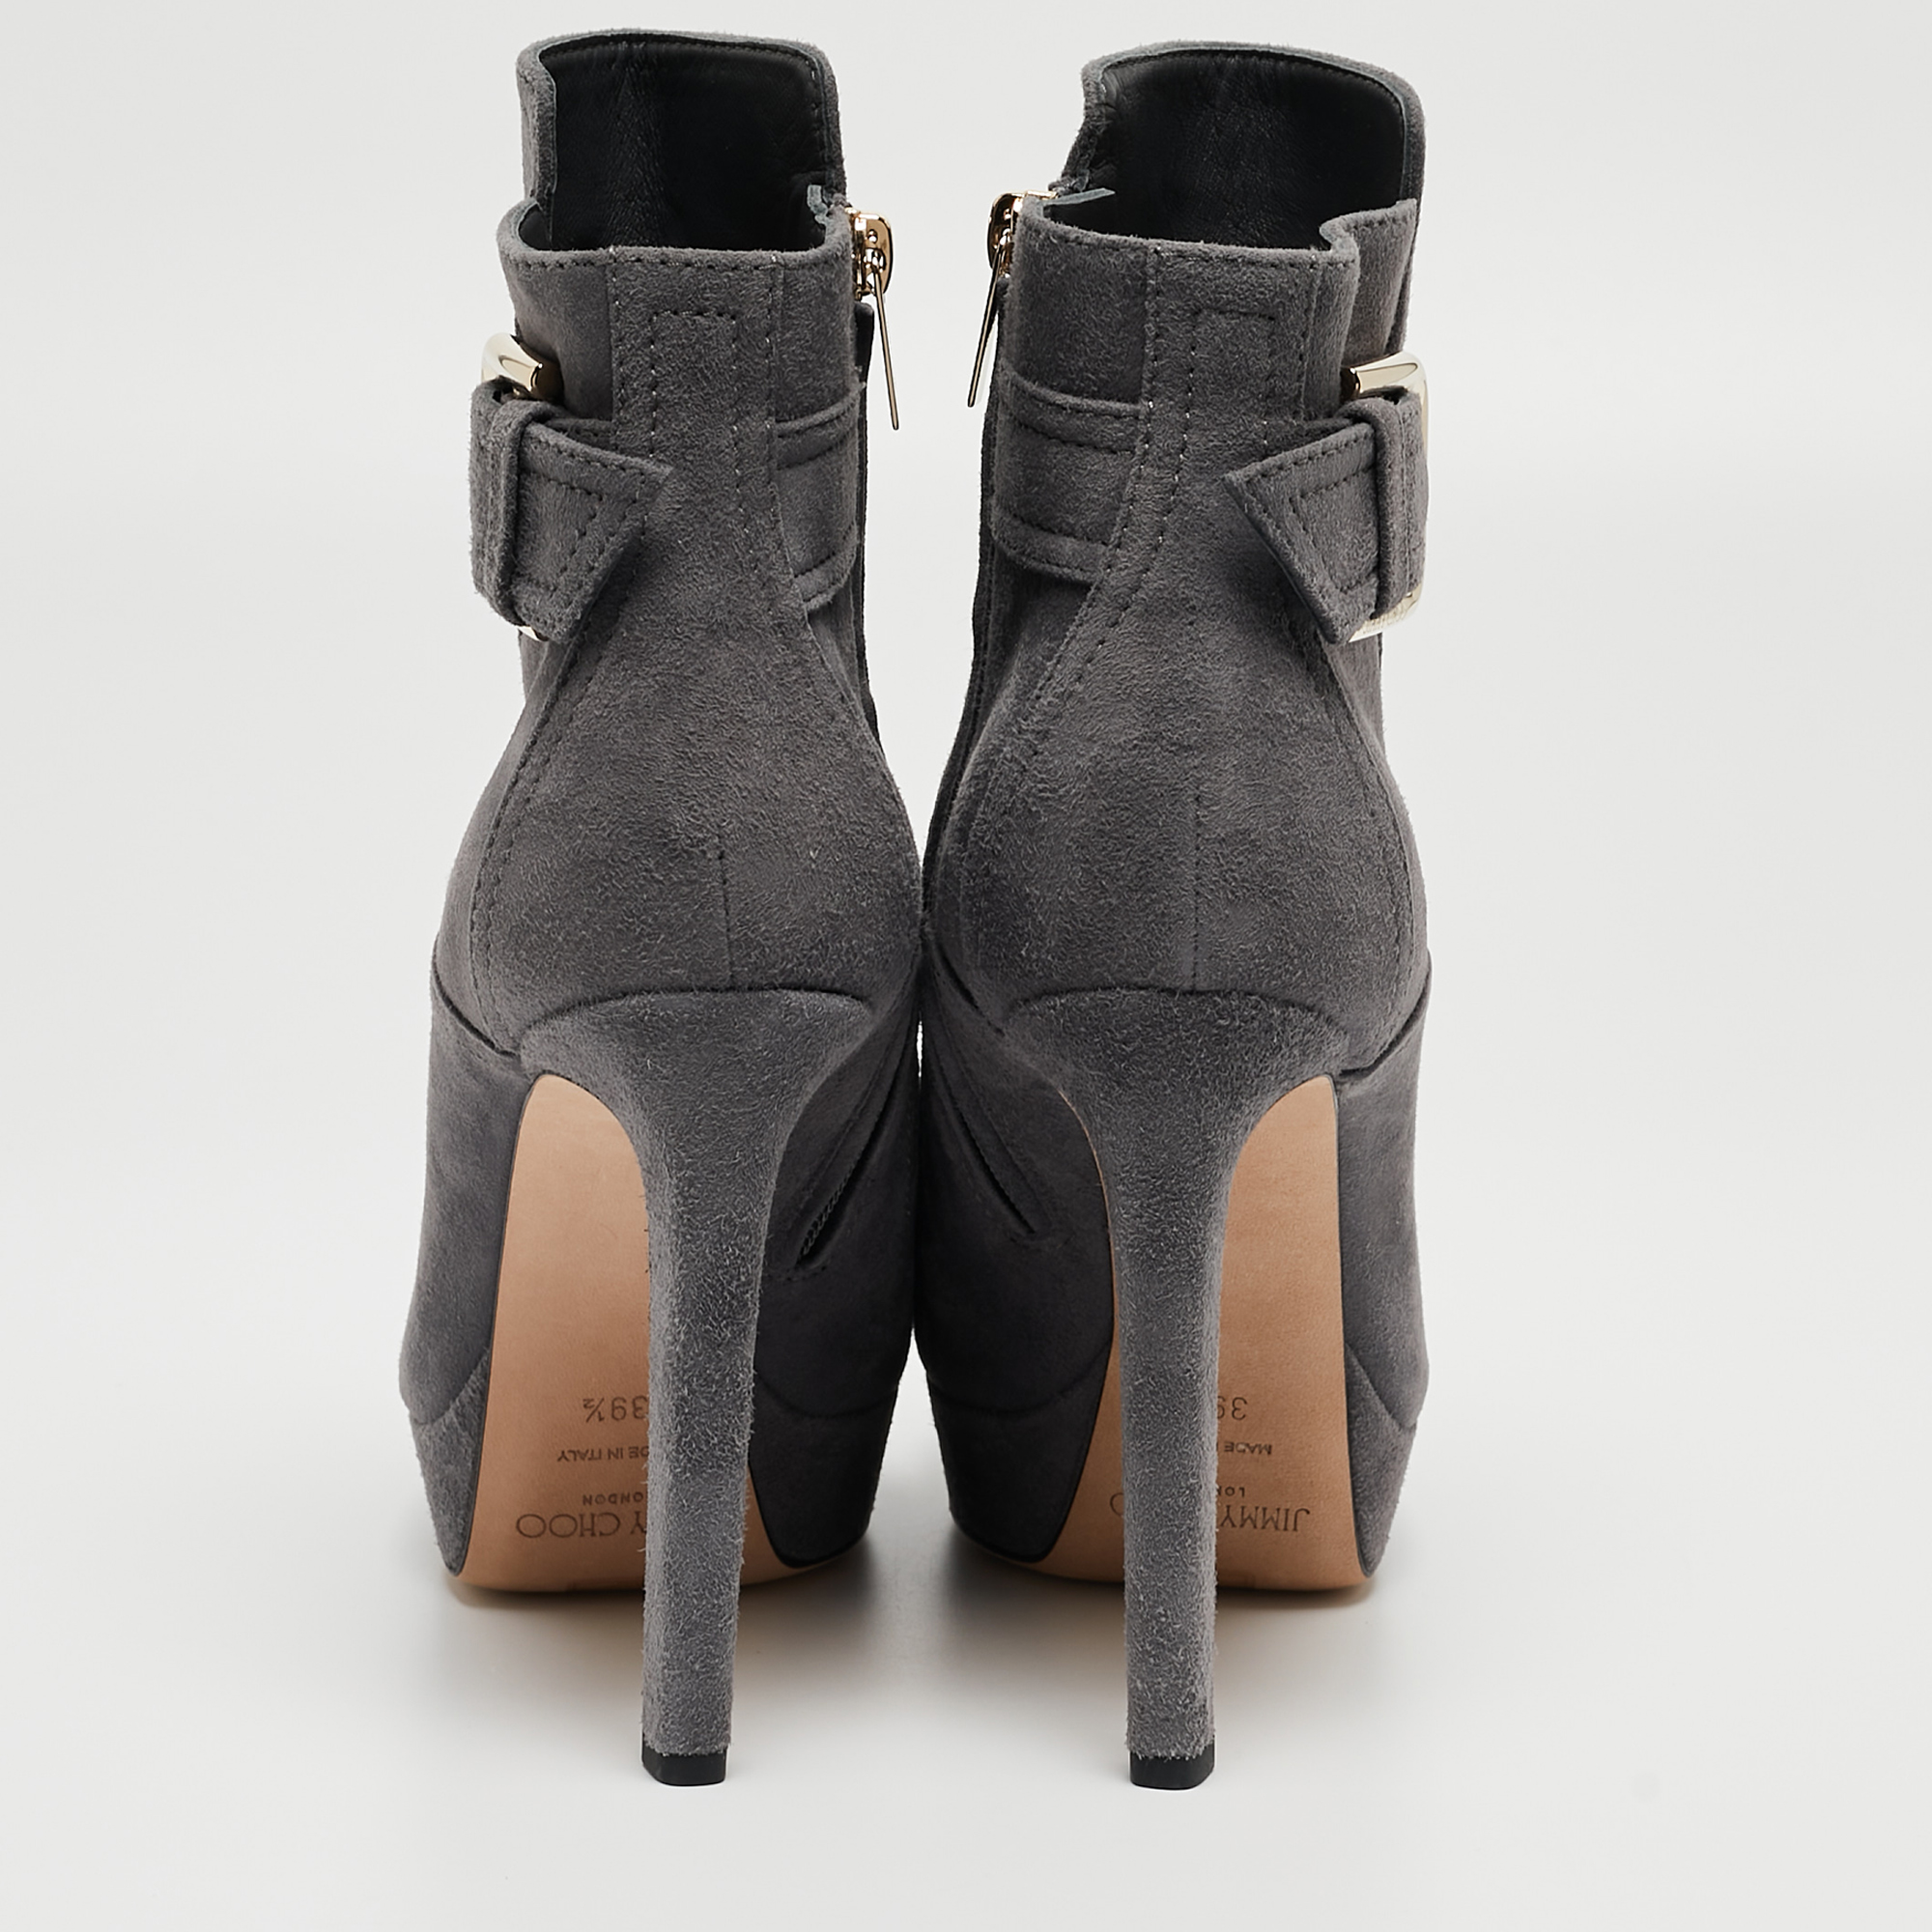 Jimmy Choo Grey Suede Britney Ankle Boots Size 39.5